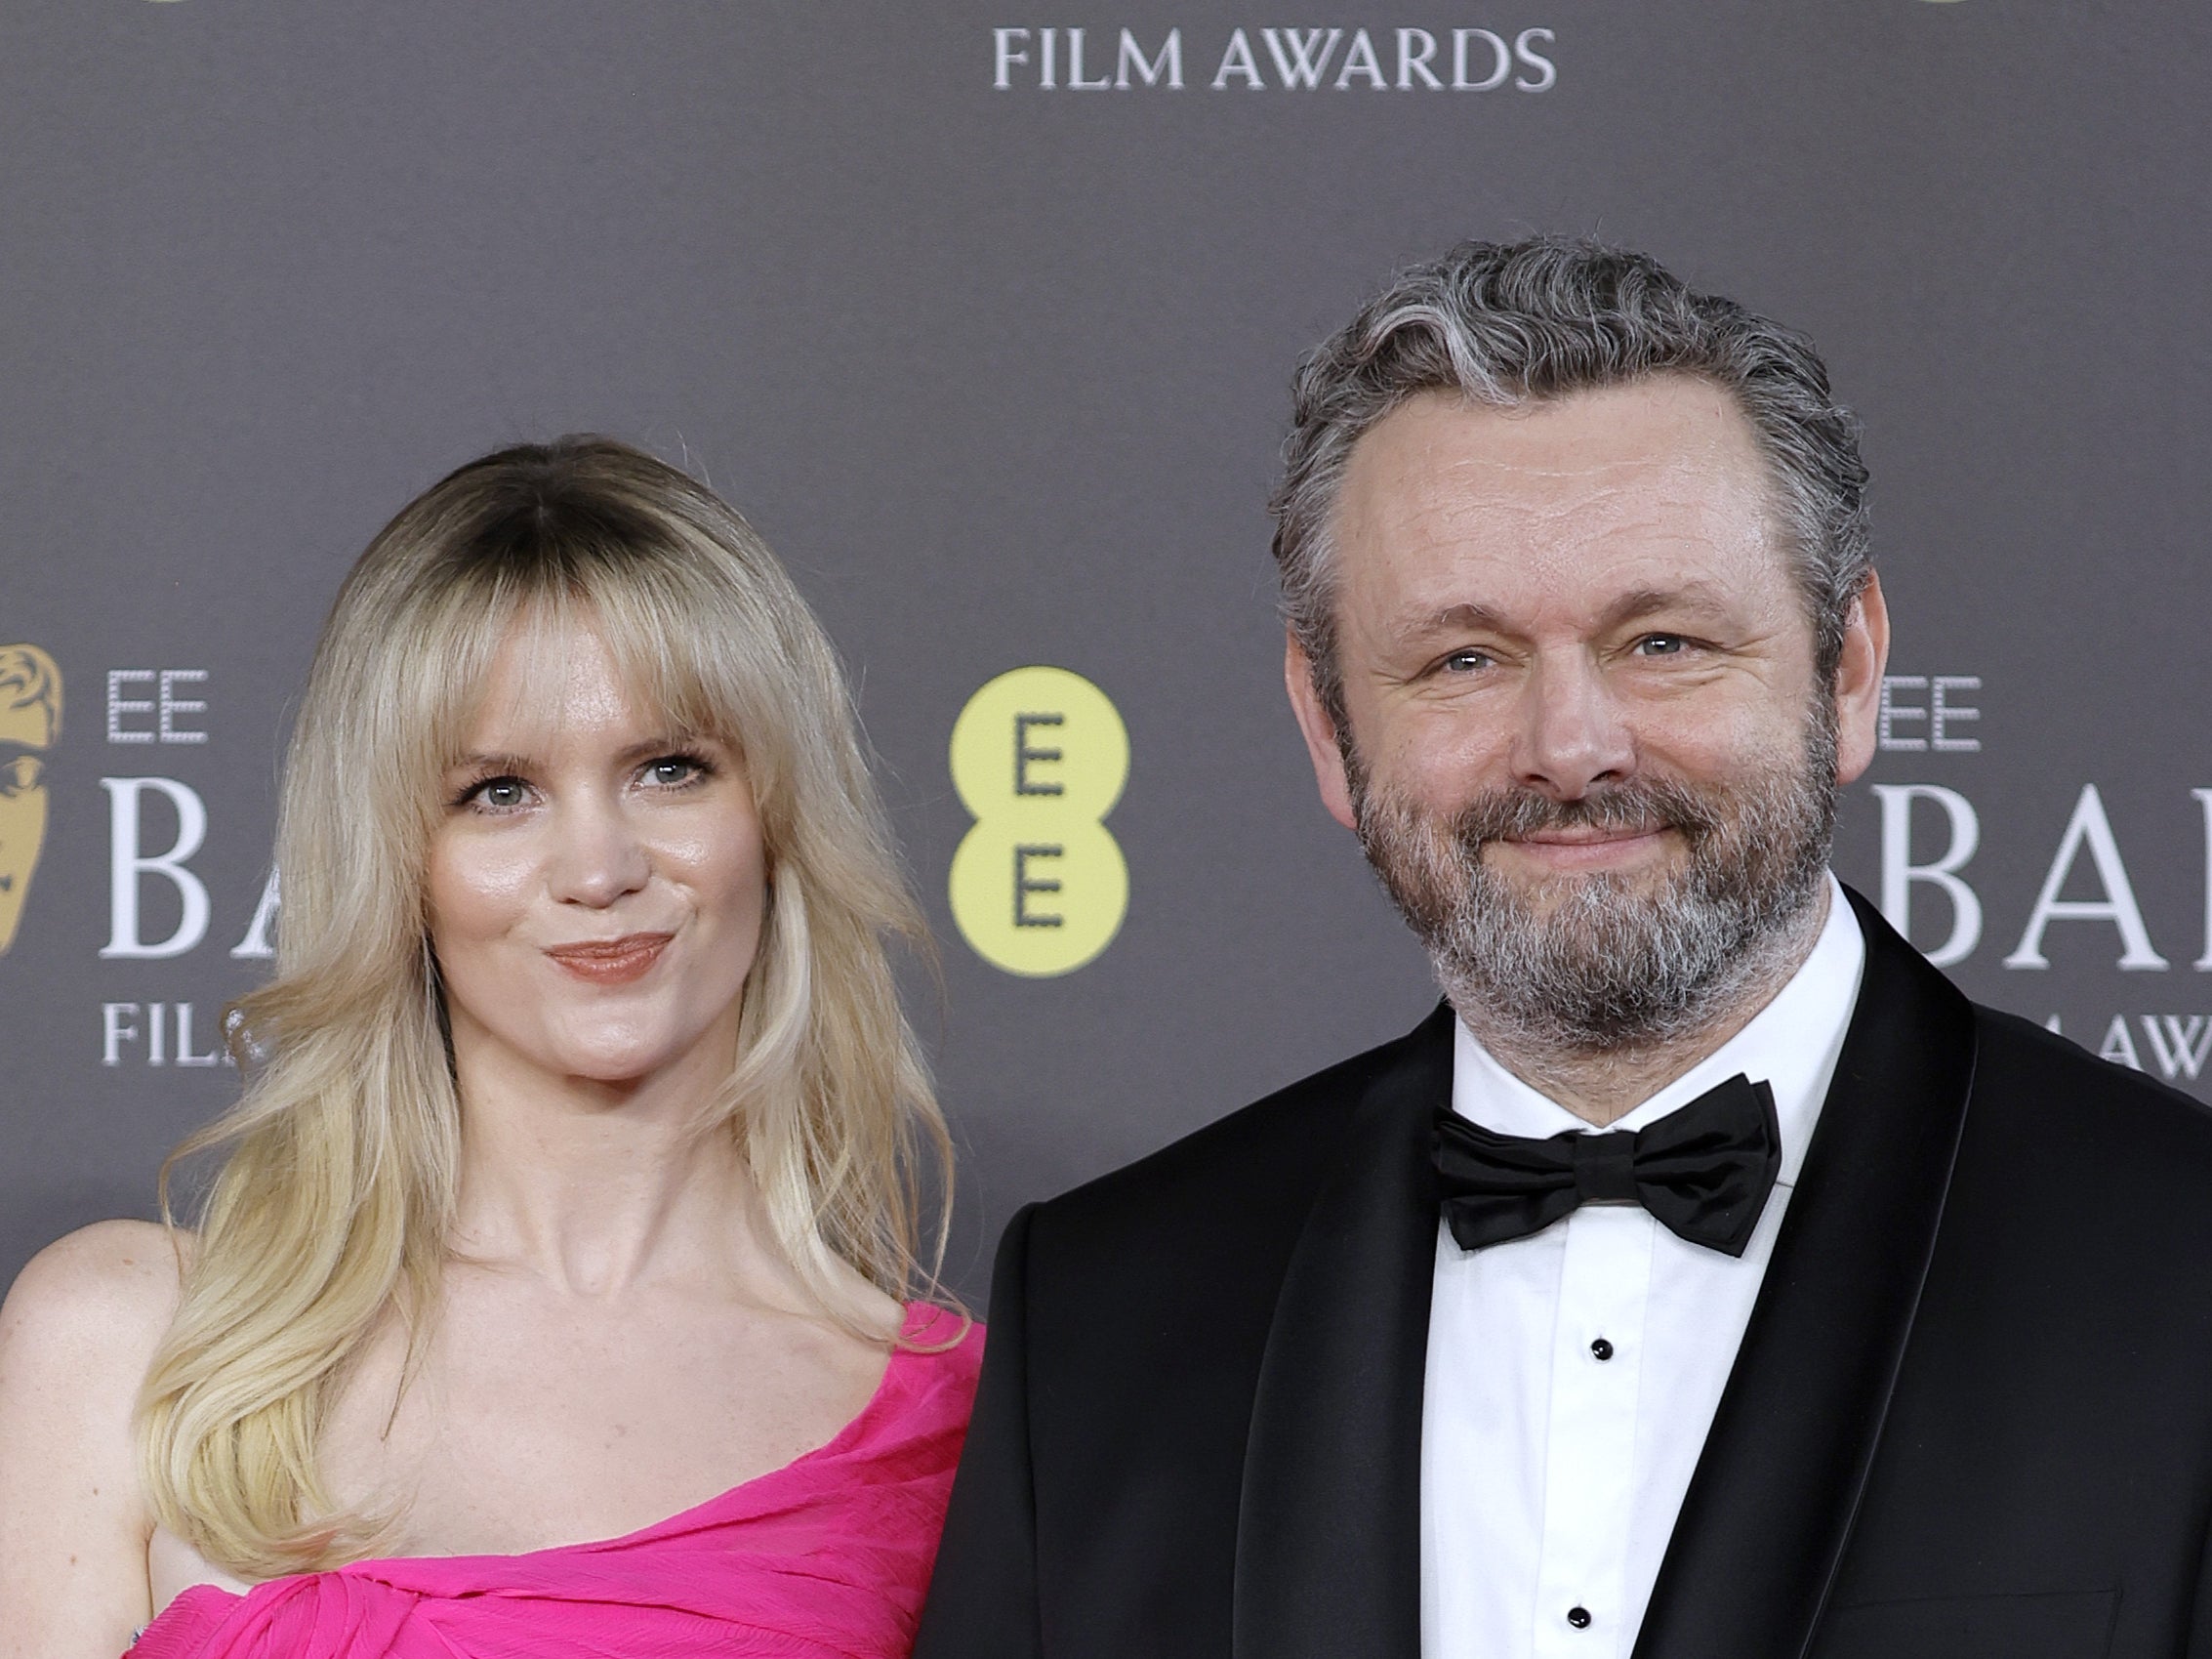 Michael Sheen has admitted to a ‘concern’ over being in a relationship with Anna Lundberg, 30, who is just five years older than his daughter